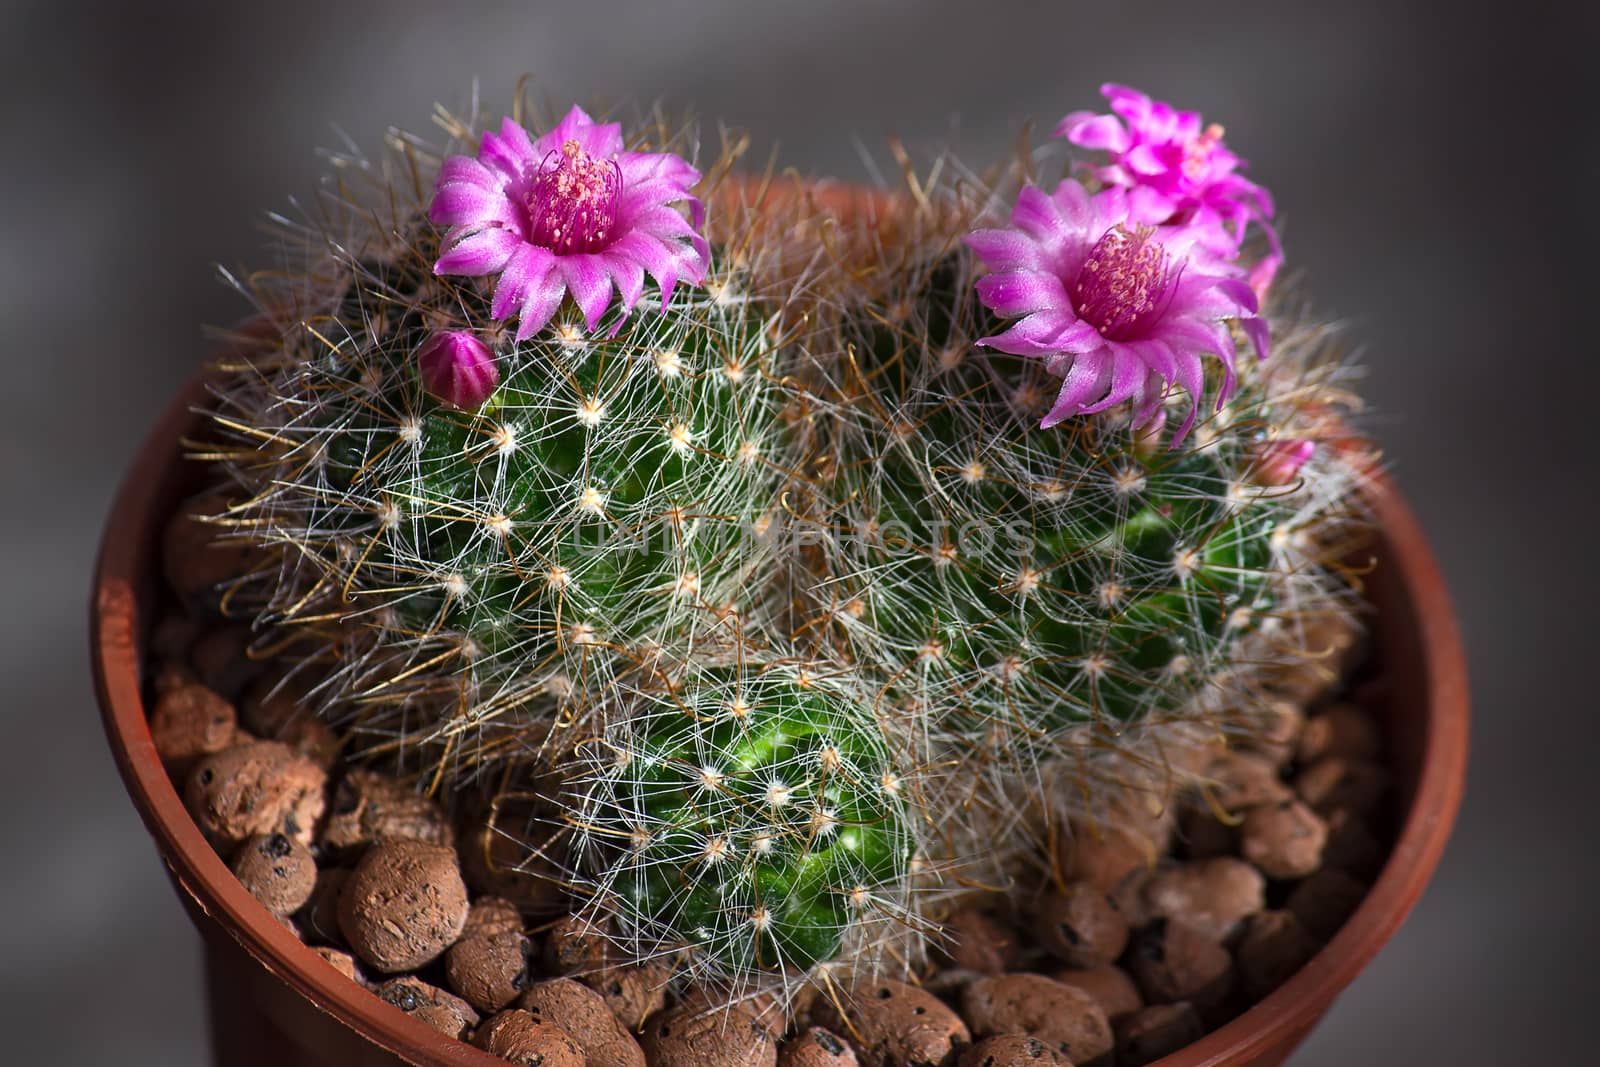 Cactus with flowers  on dark background (Mammillaria).Image with shallow depth of field.